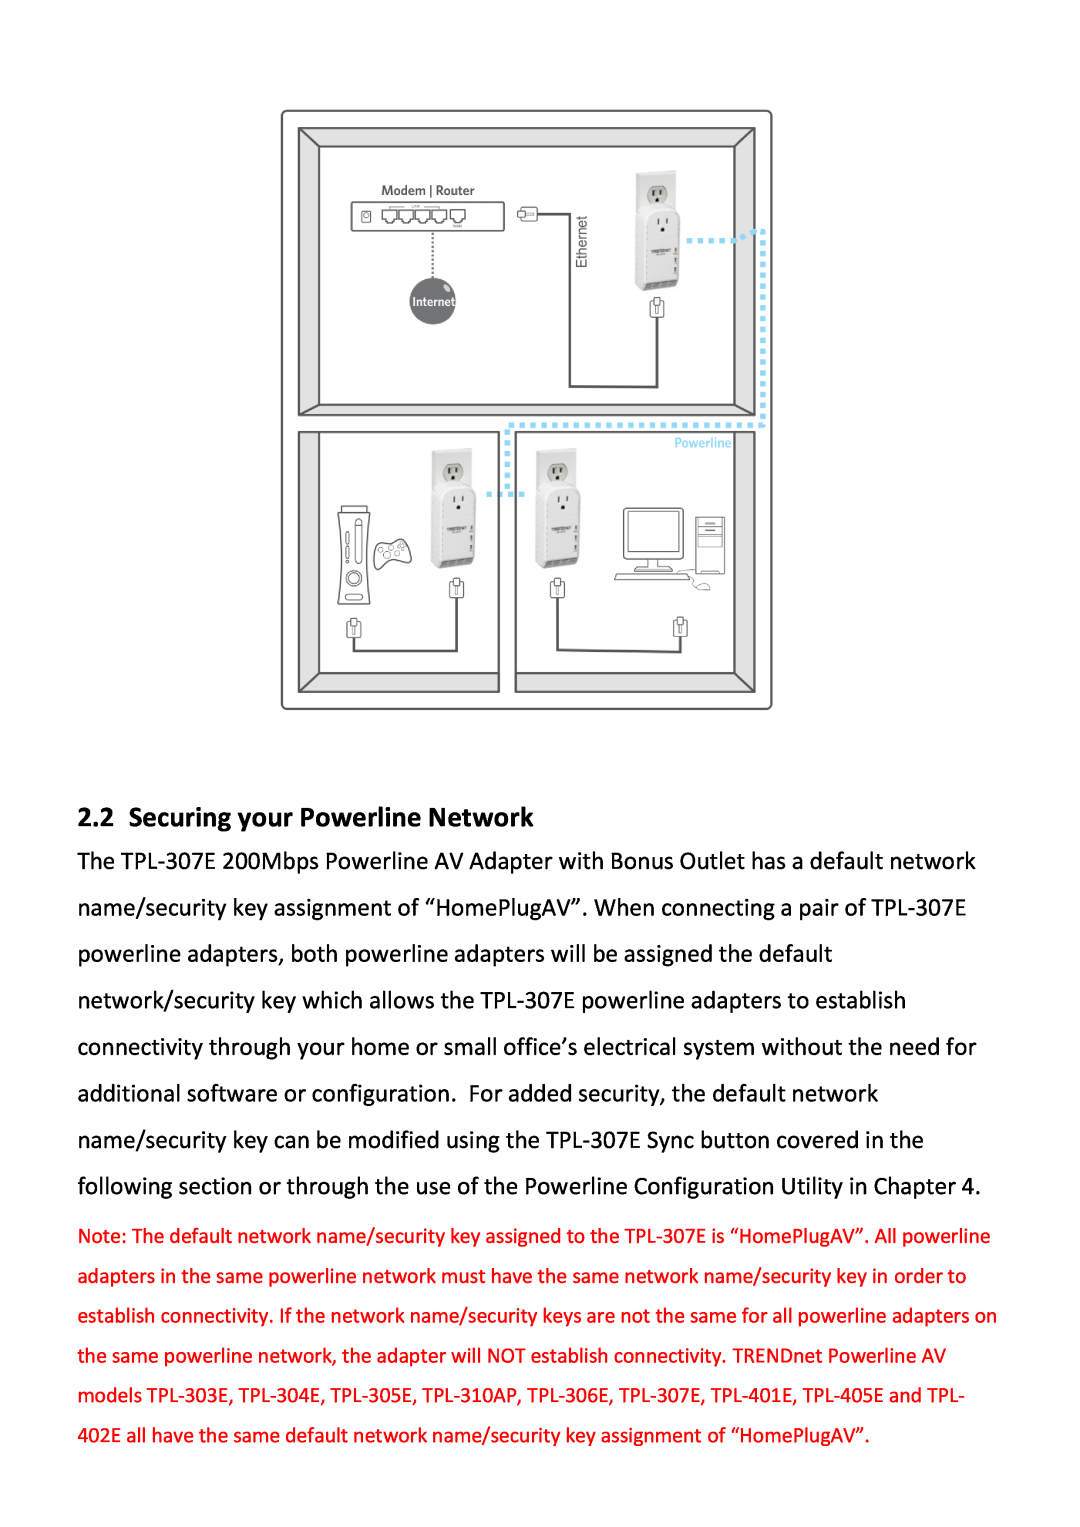 TRENDnet TPL307E2K manual Securing your Powerline Network 